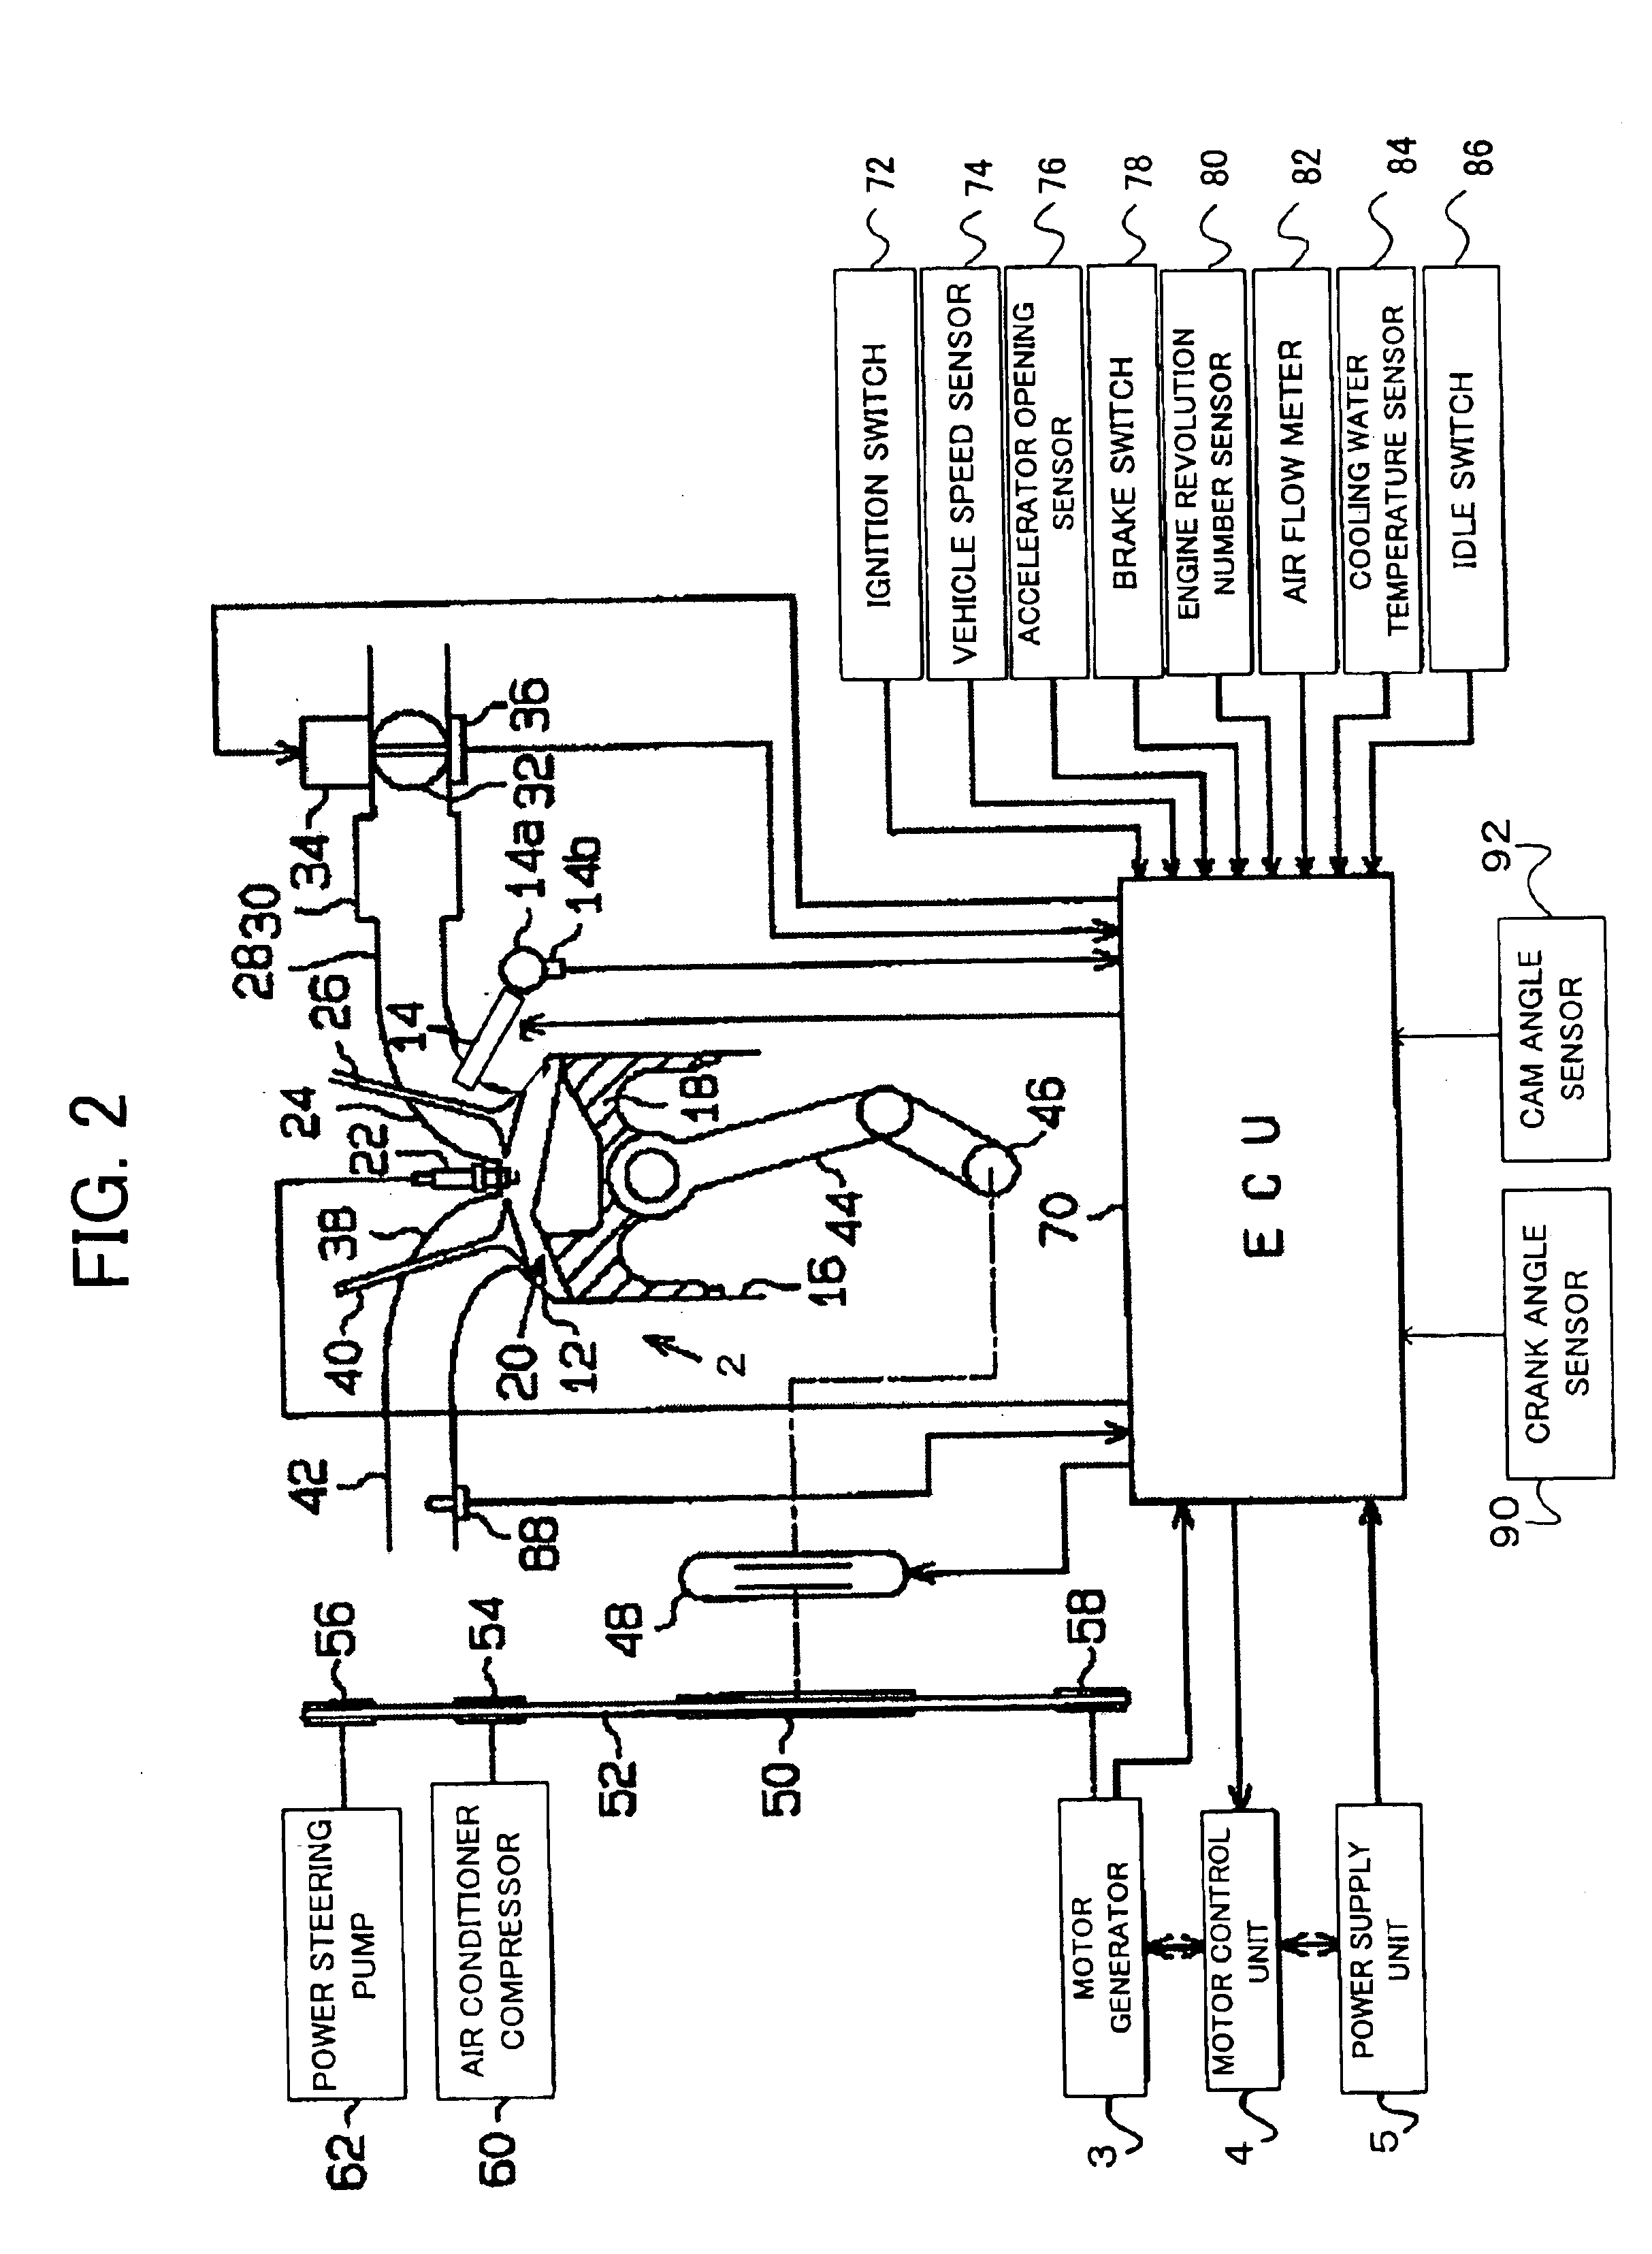 Stop and start control apparatus of internal combustion engine